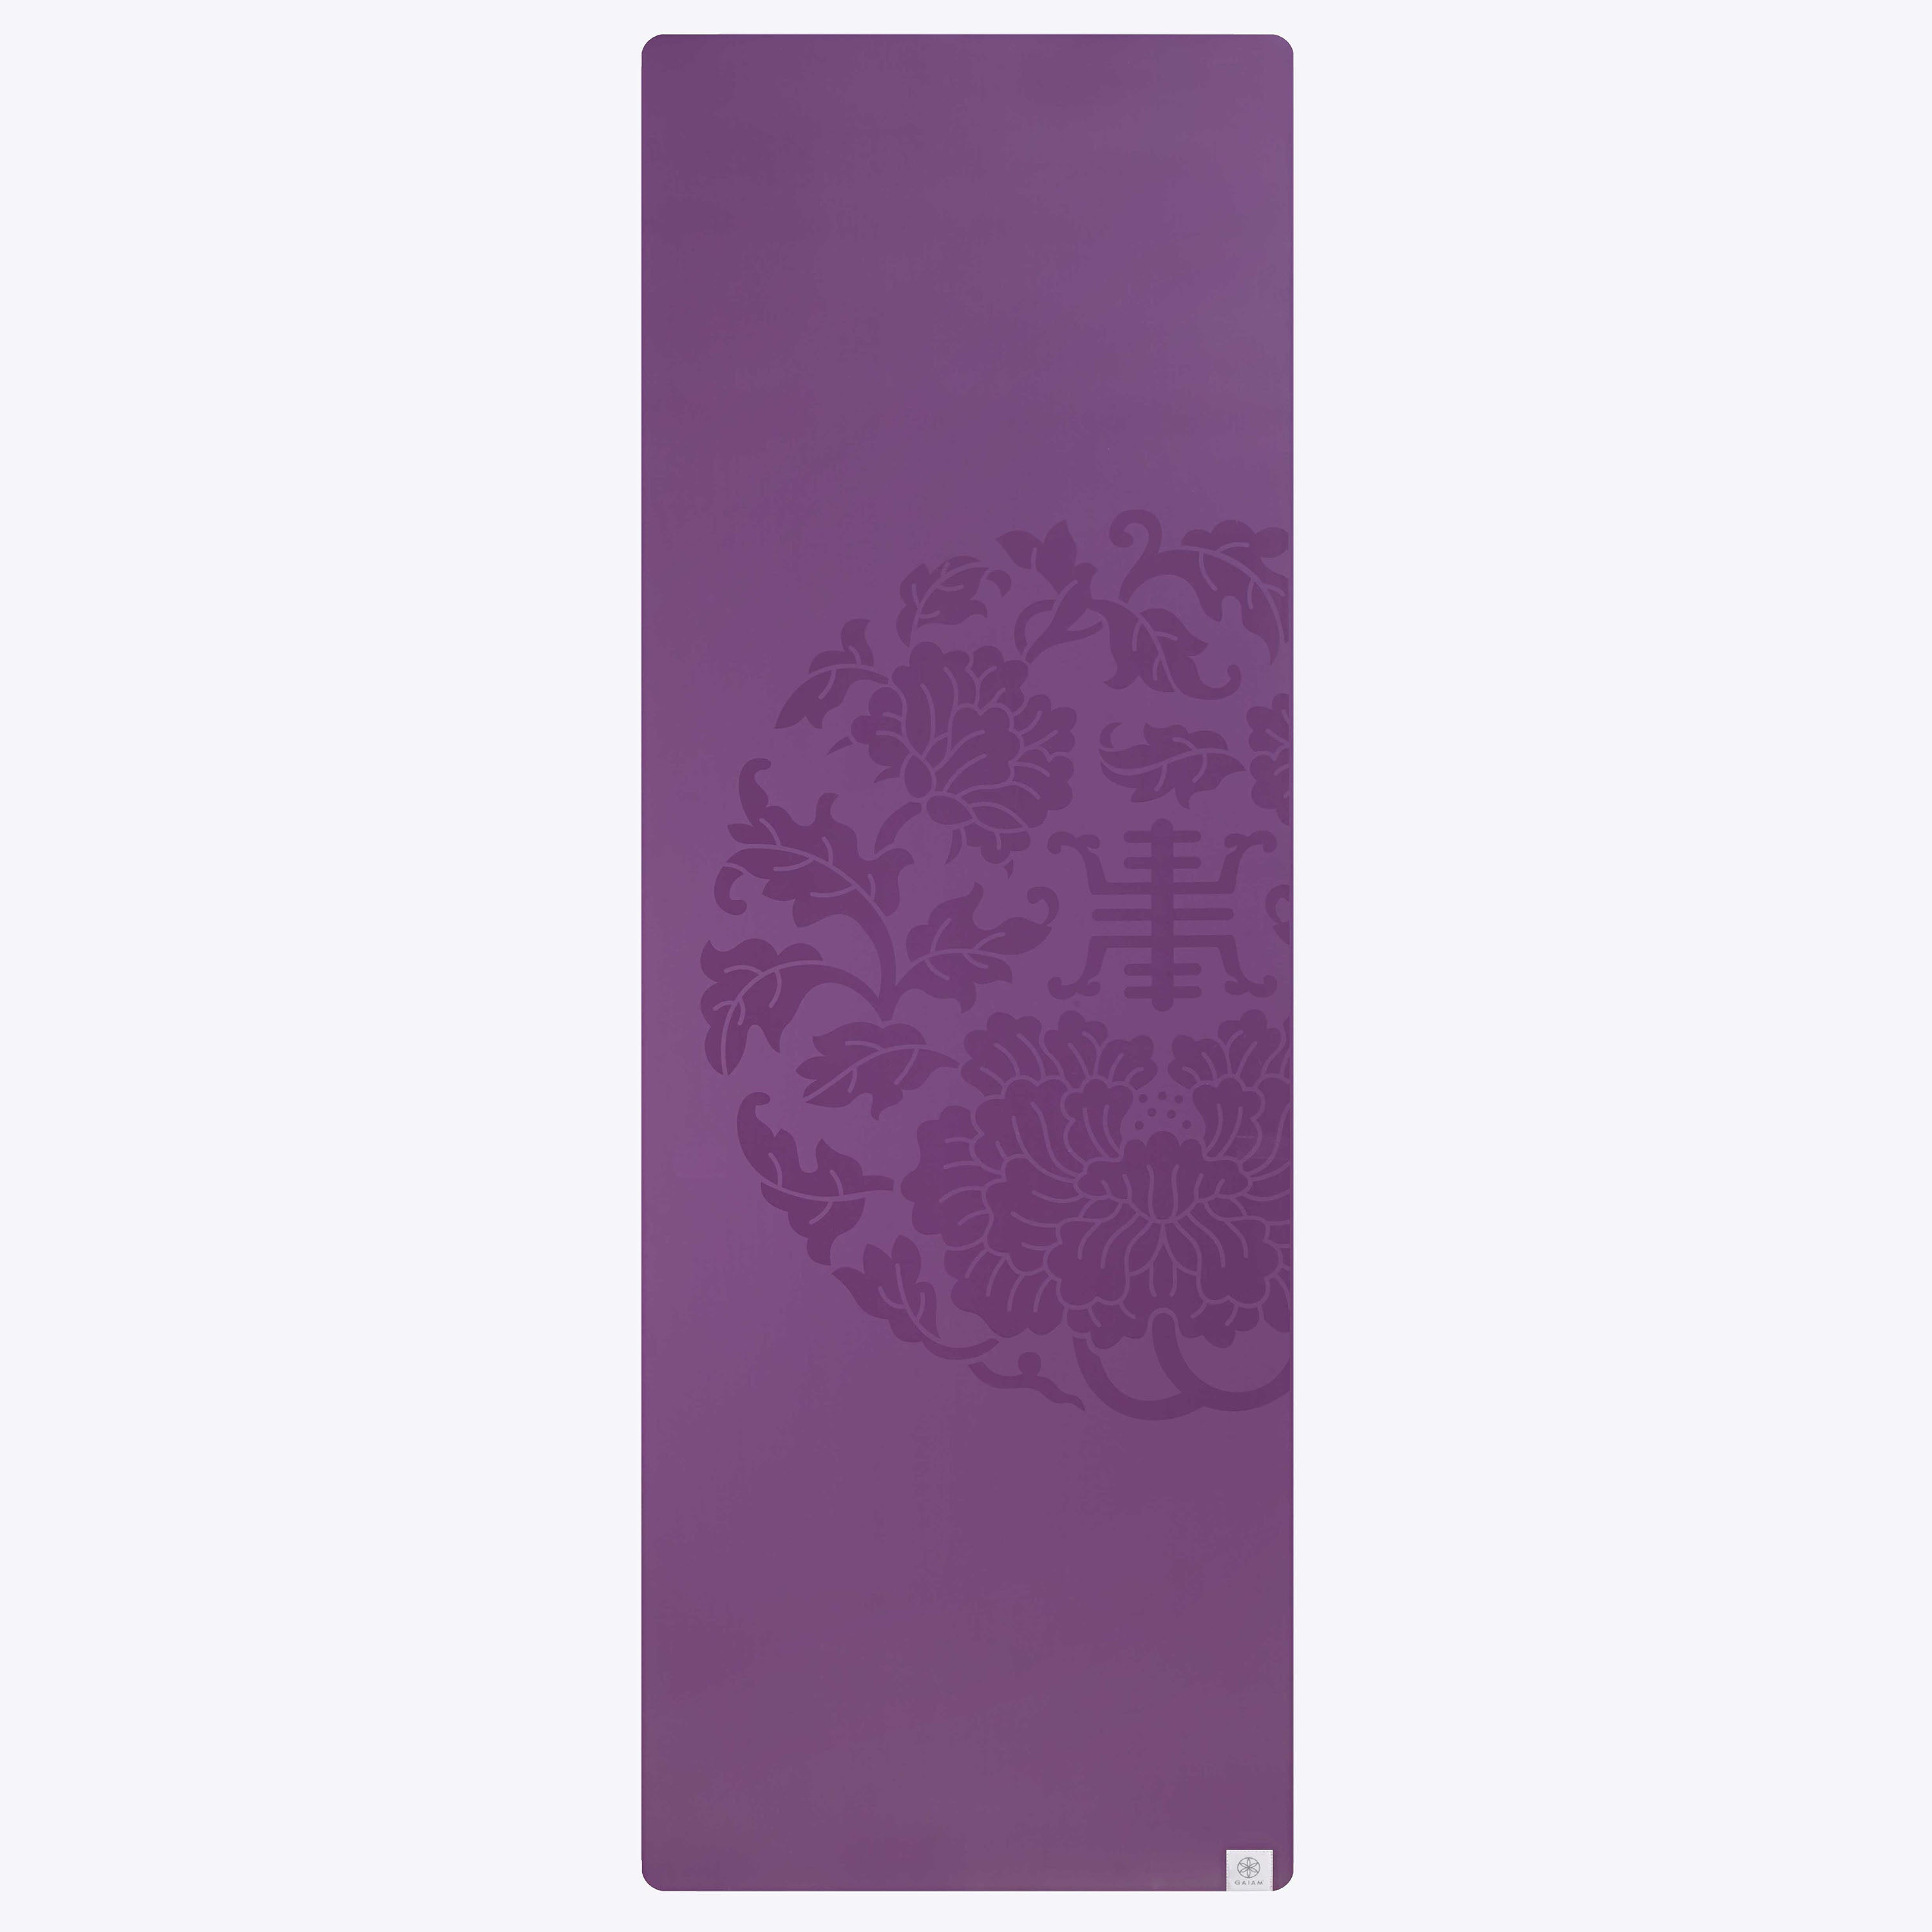 TOPSELLER! Gaiam Sol Dry-Grip Yoga Mat (5mm) $55.98  Full body weight  workout, Whole body workouts, Floor workouts